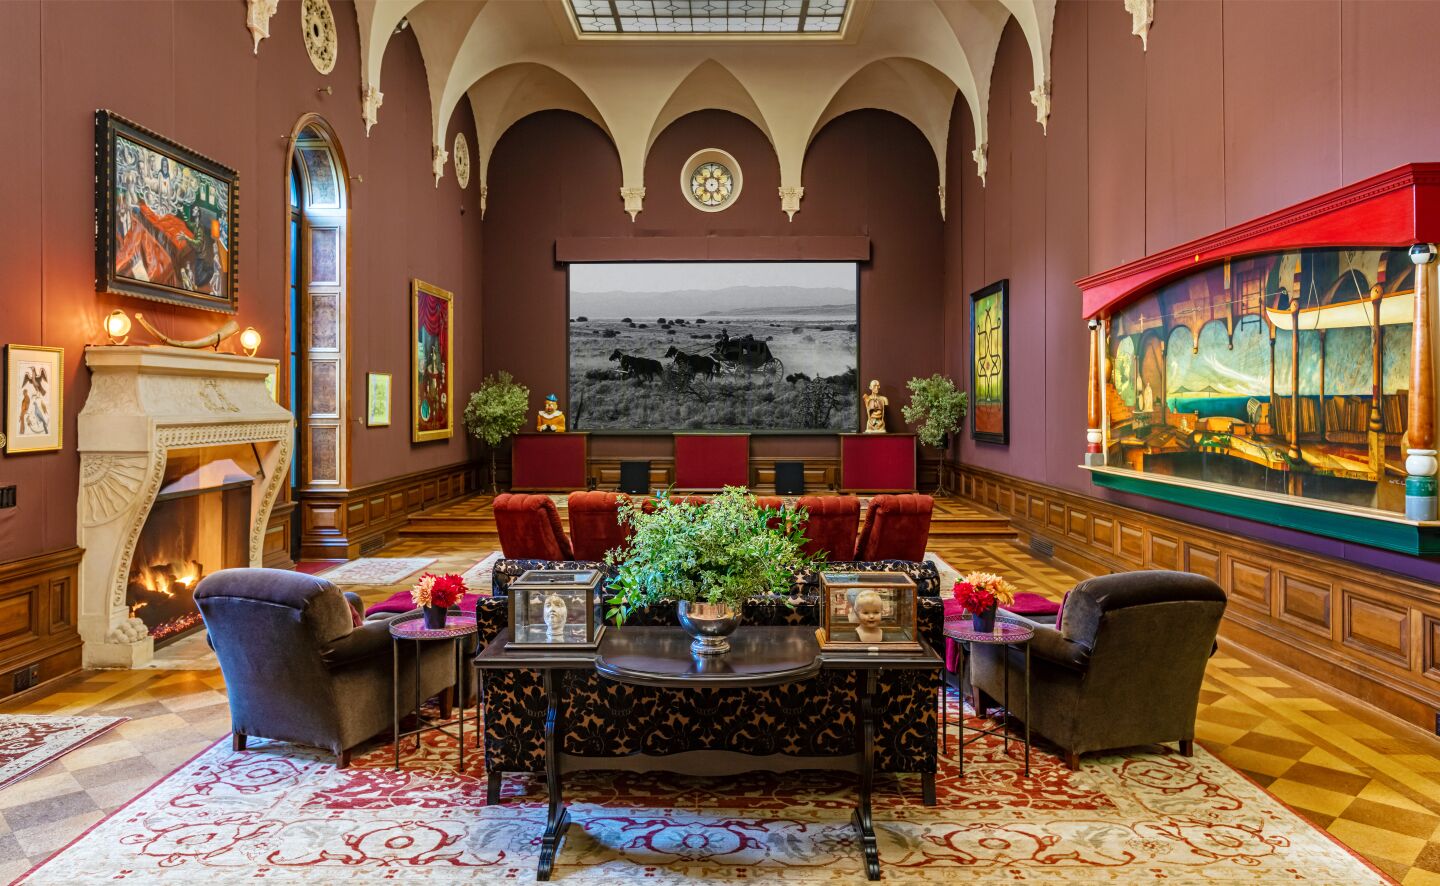 The ballroom with living room furniture, a fireplace, high ceiling, colorful art, rug, and moving screening area.